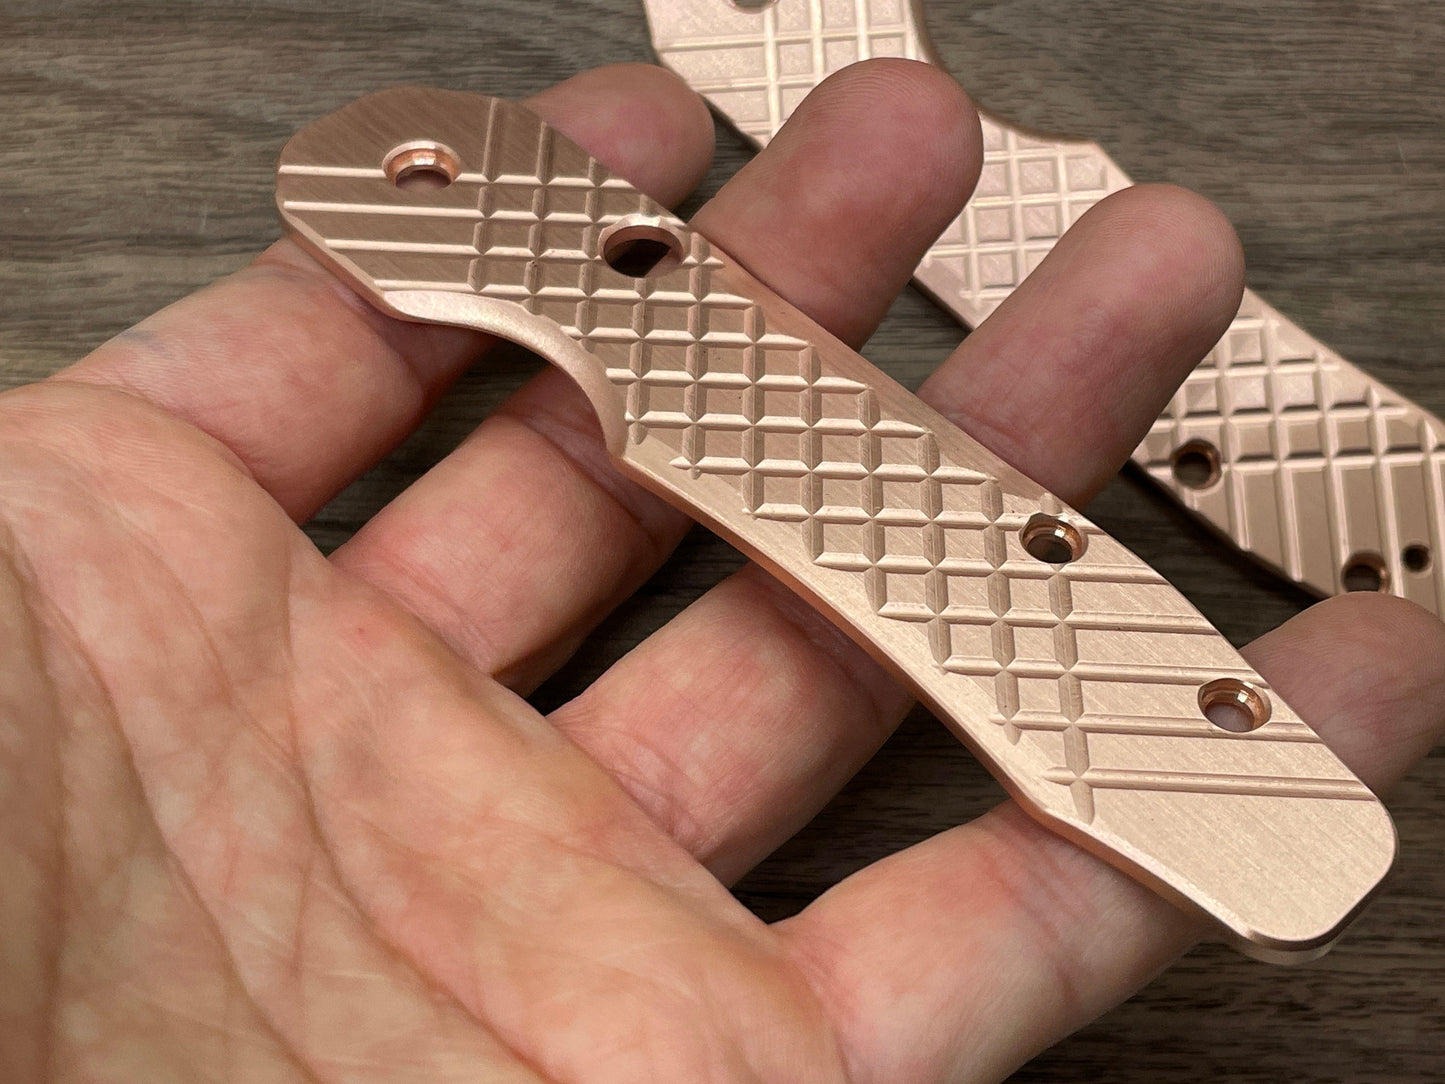 Pure Copper FRAG milled Scales for Spyderco SMOCK